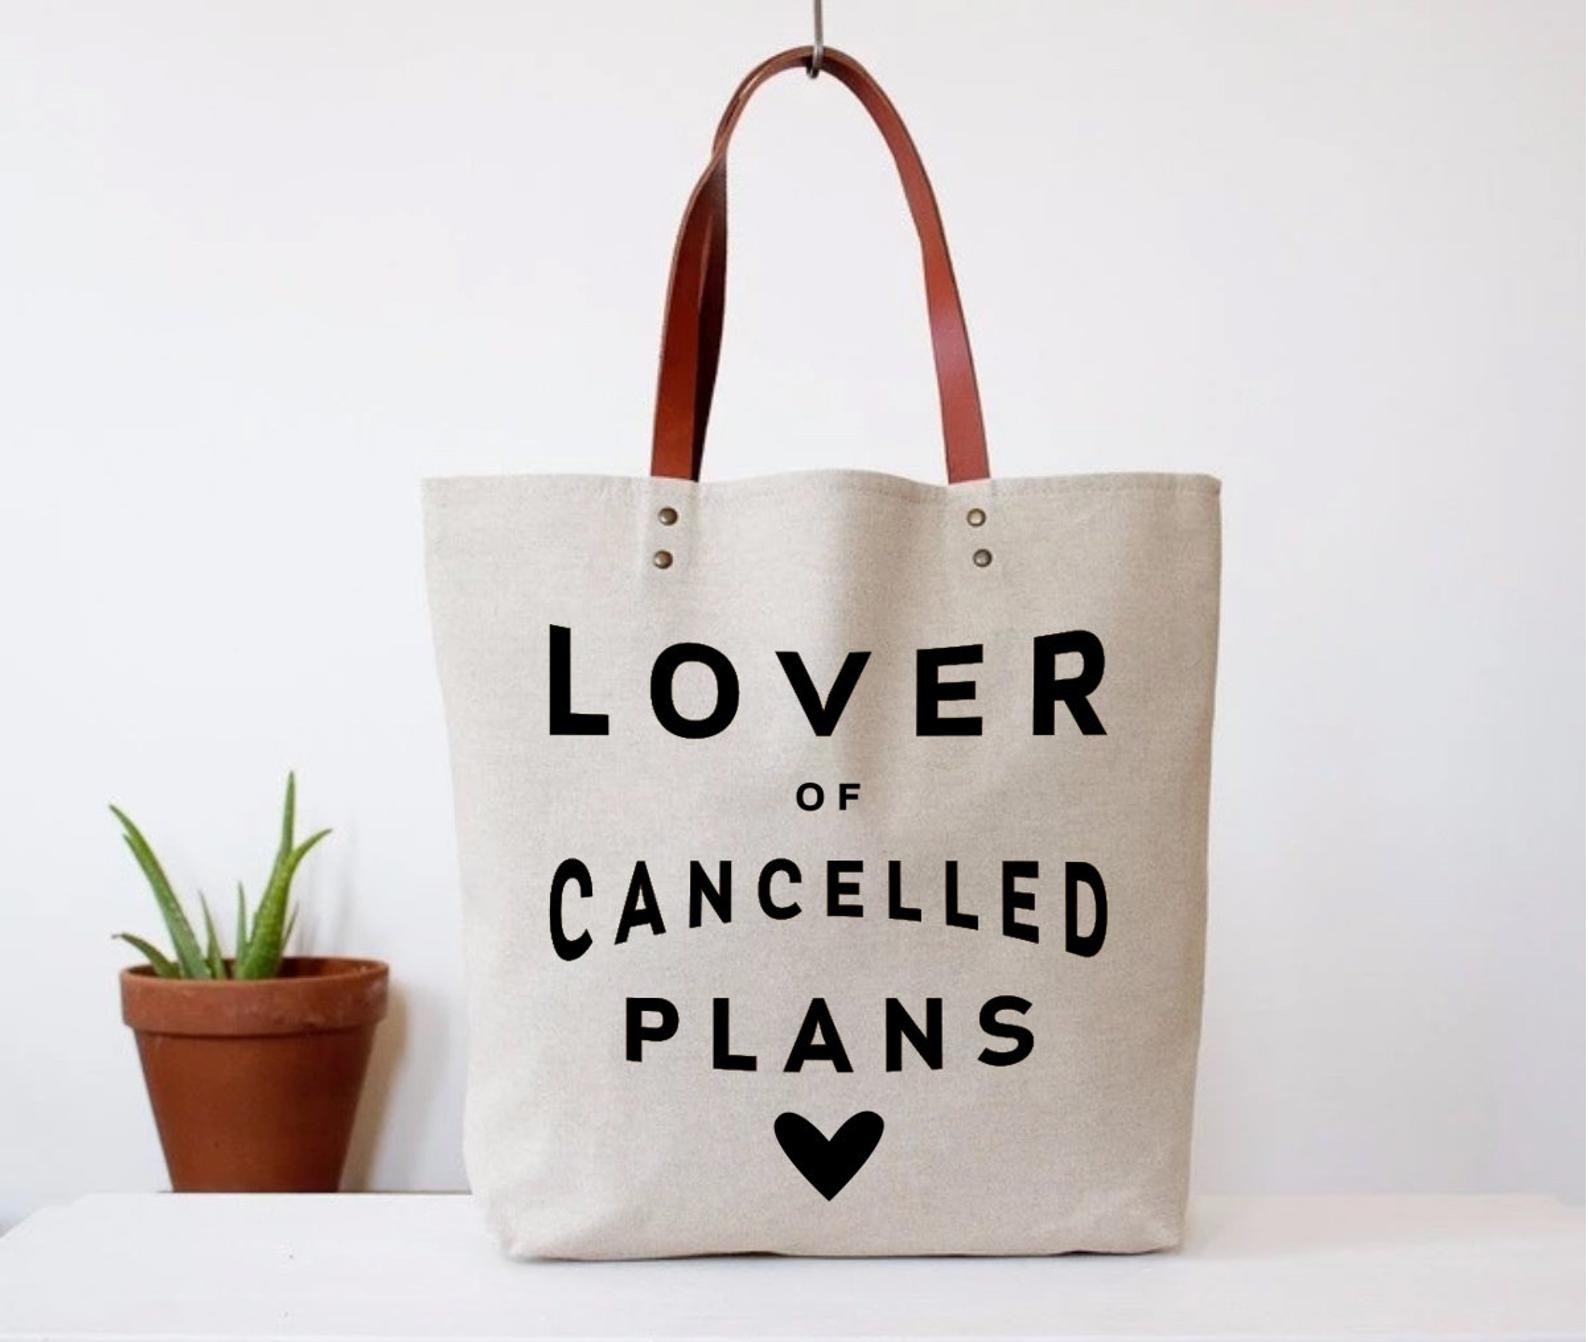 Lover of Canceled Plans Bag, from ShopFunClub